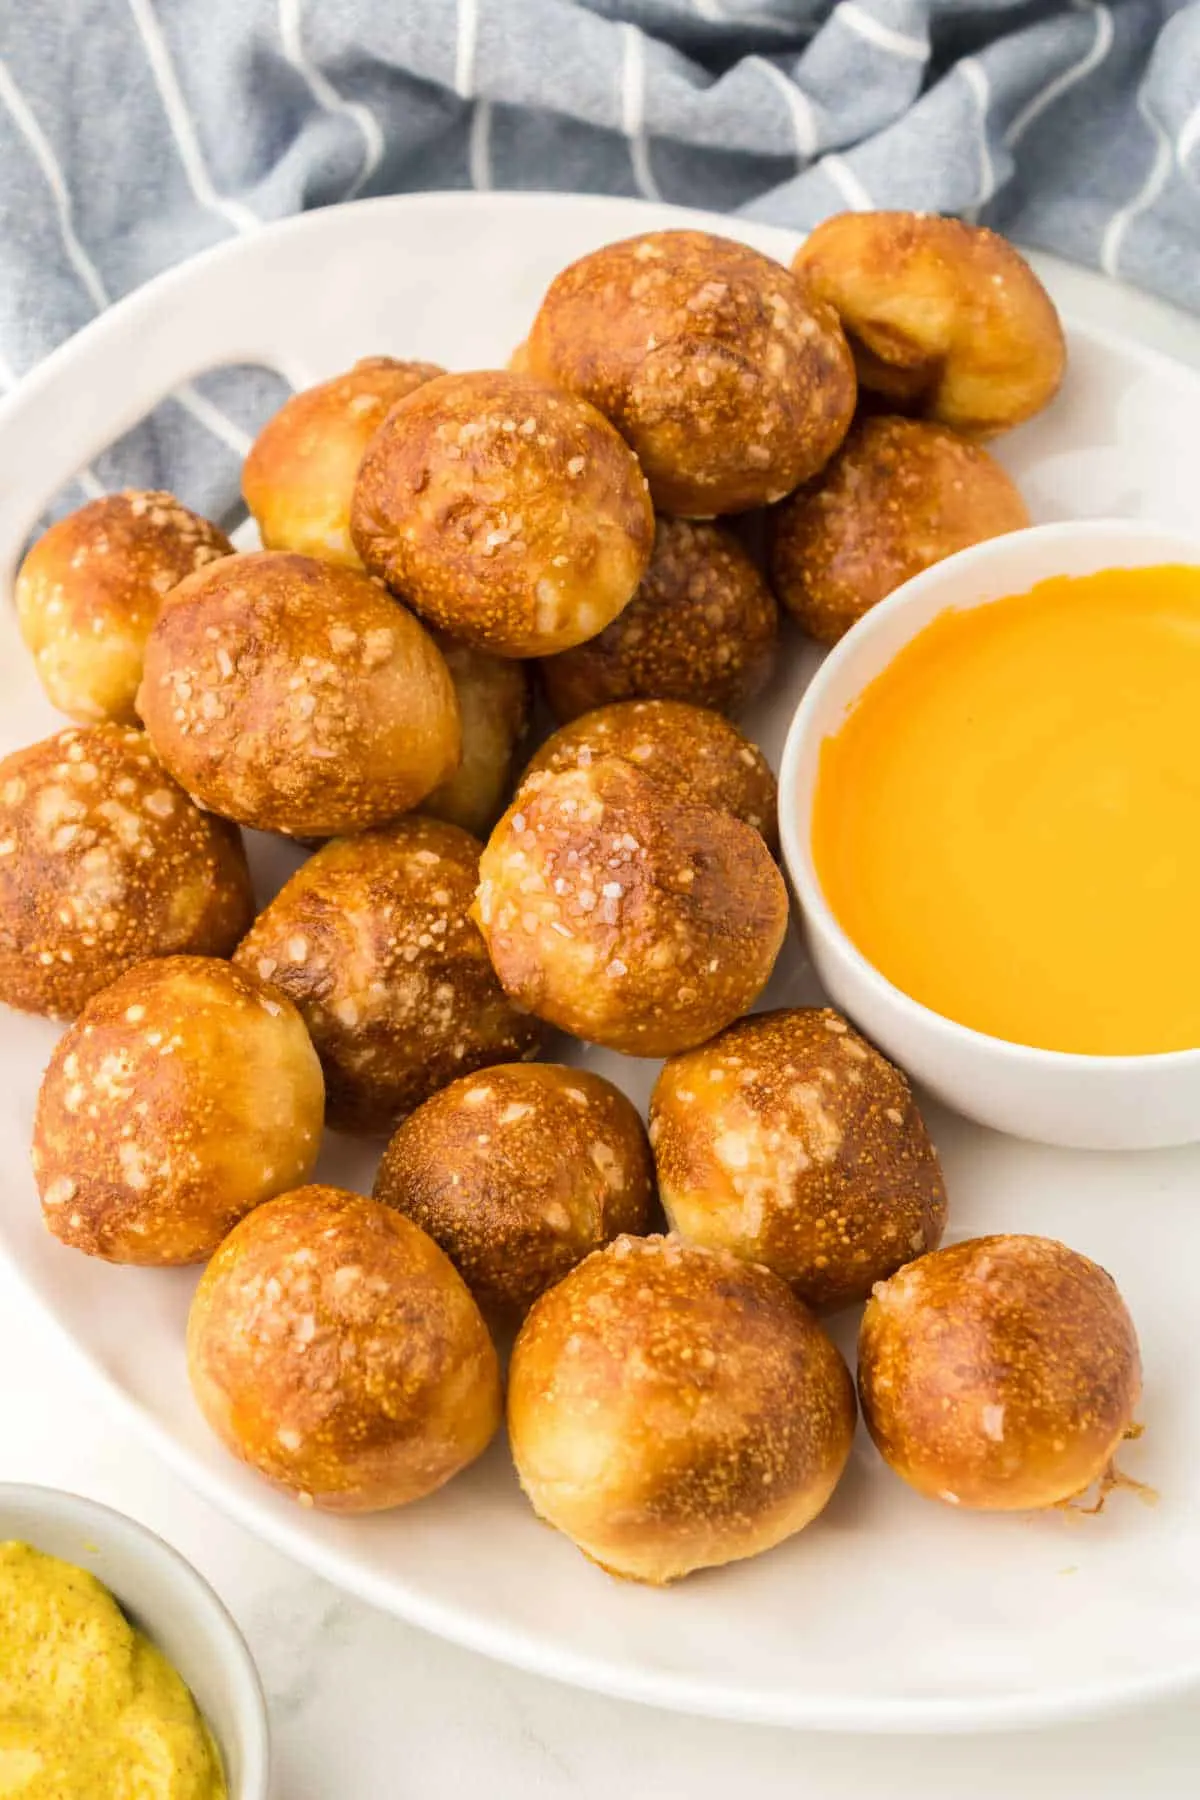 A plate of pretzel bites with cheese sauce.